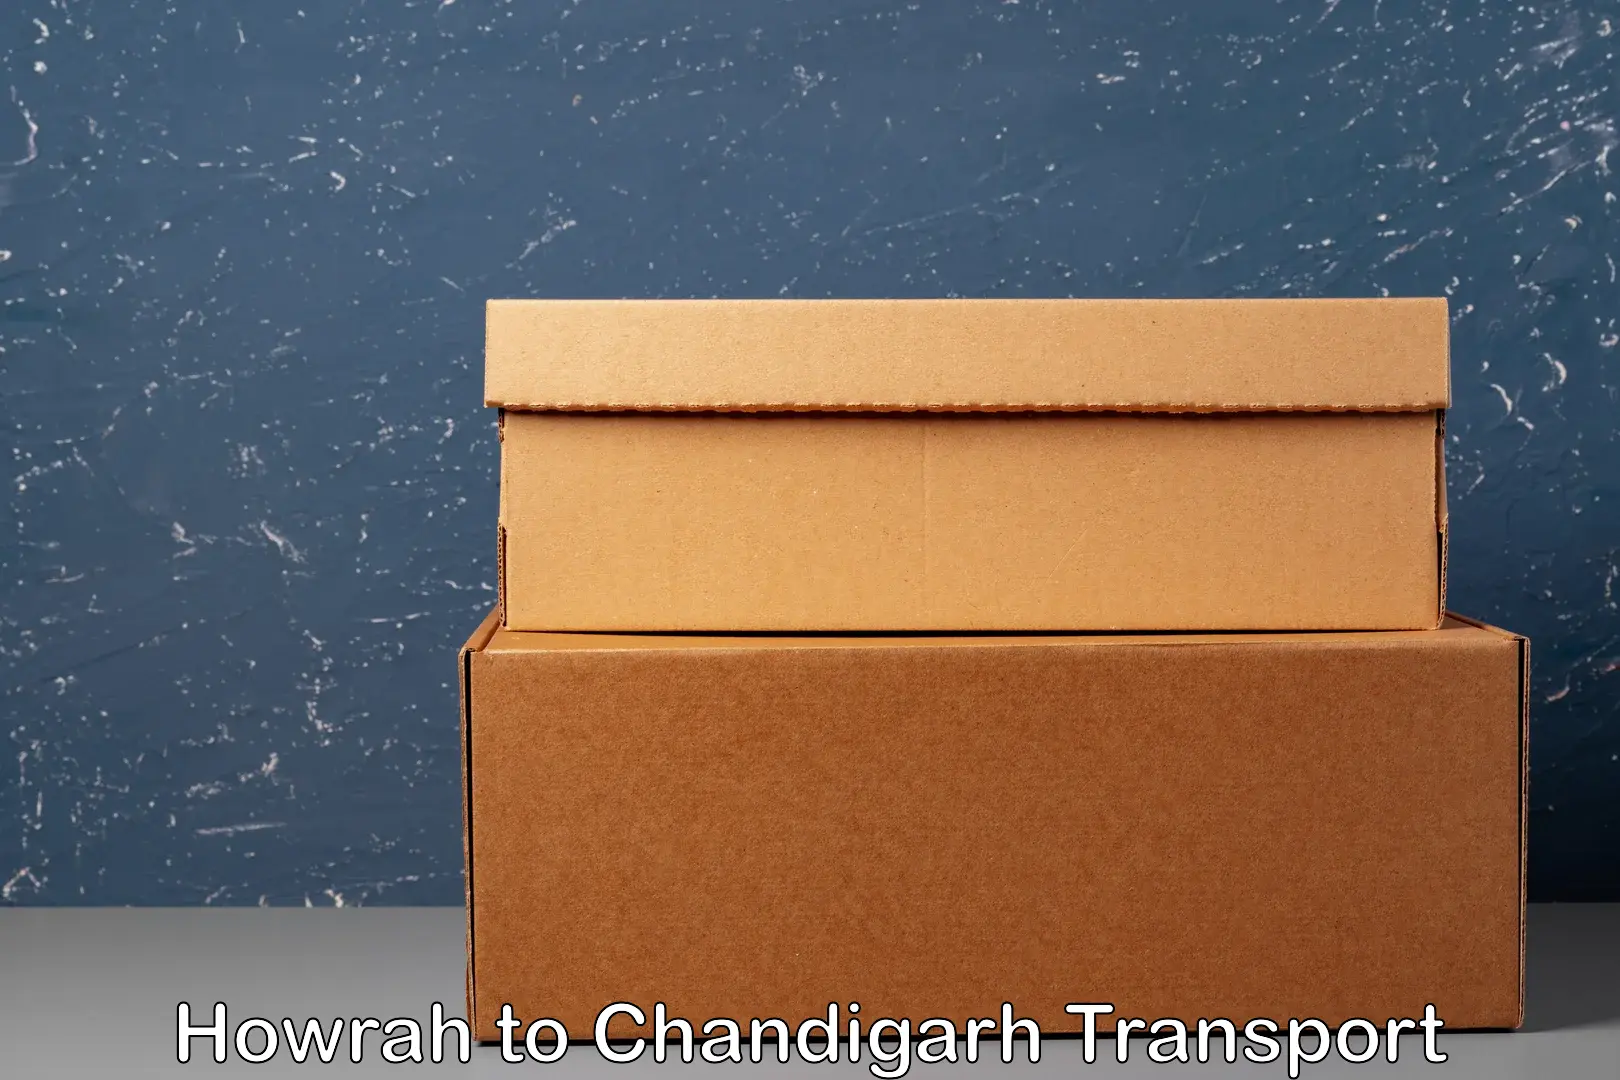 Express transport services Howrah to Chandigarh